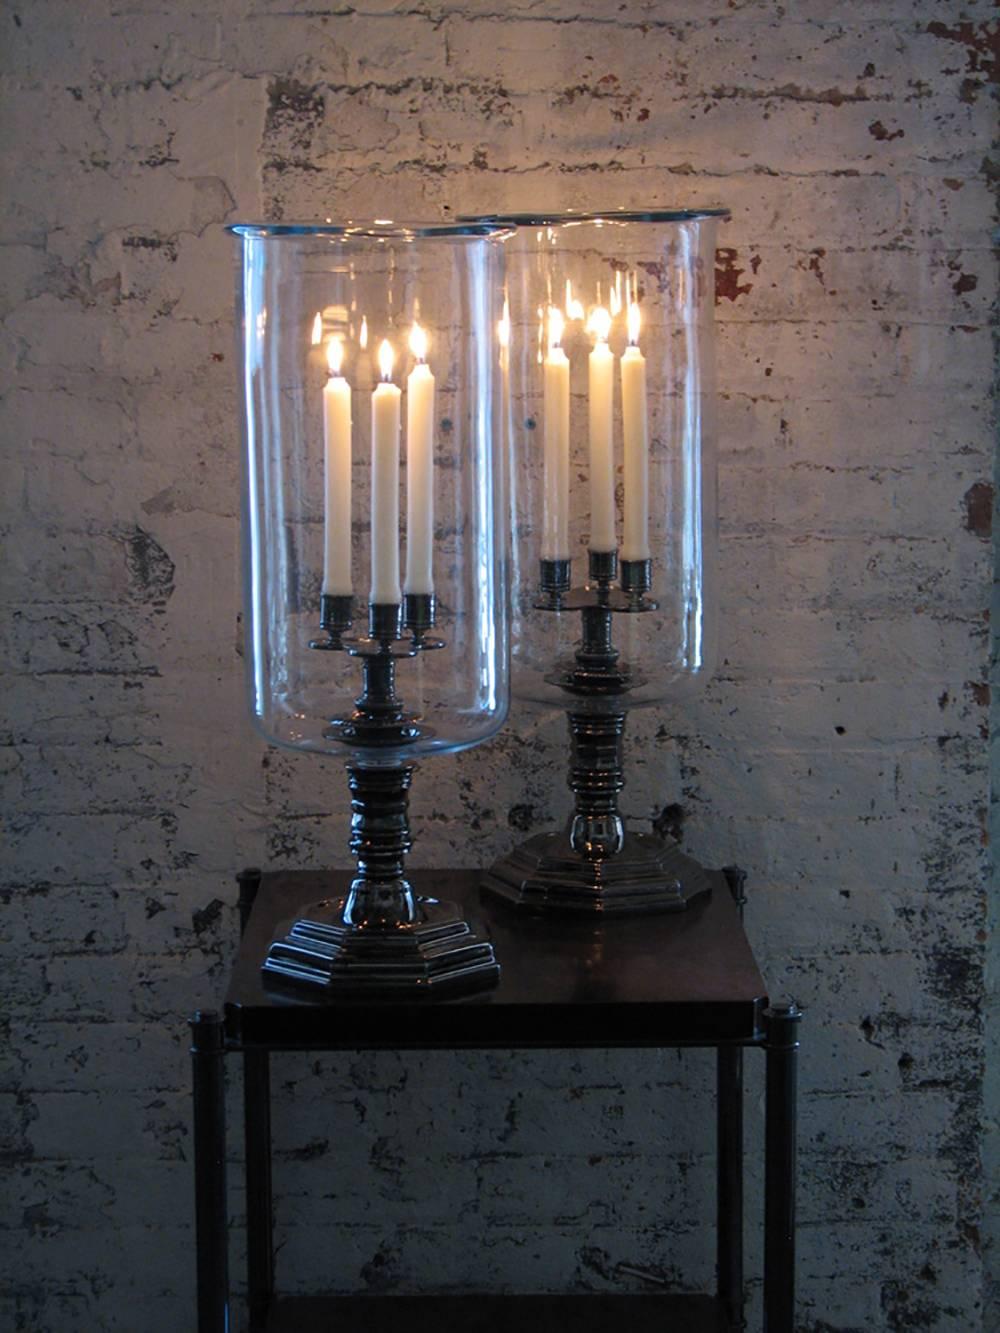 A large, Louis XIV style hurricane with black nickel-plated metal-work and a handblown shade with a rolled lip at the top, designed for use with three candles.